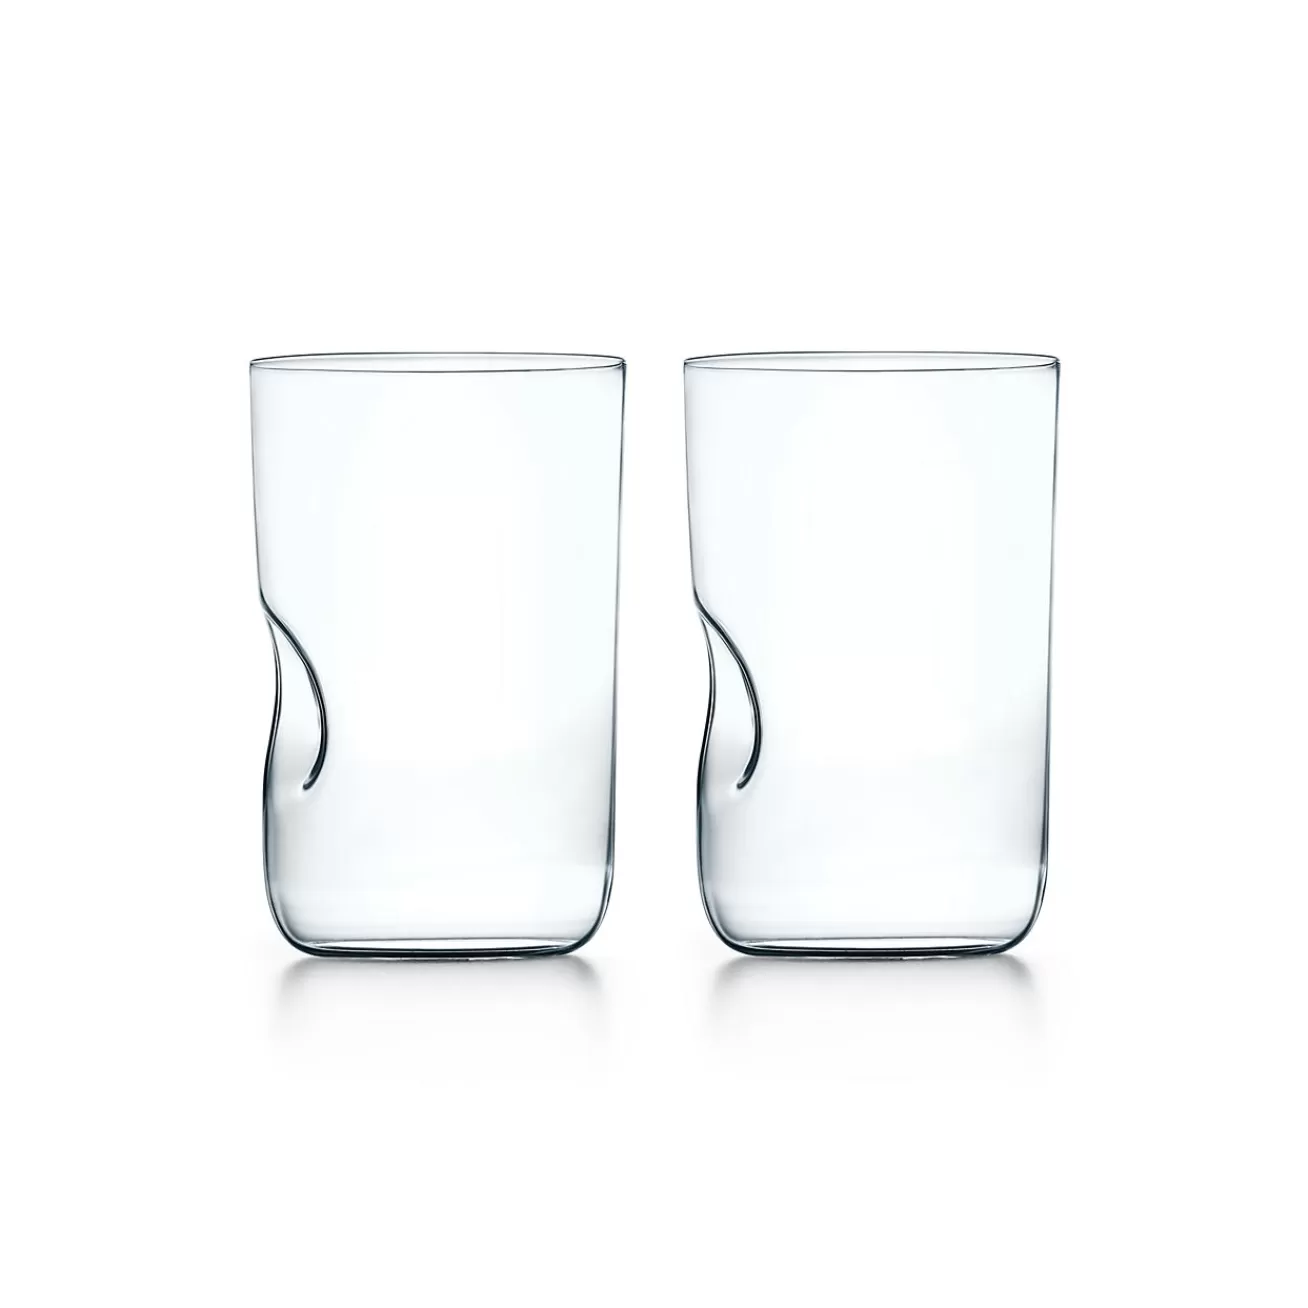 Tiffany & Co. Elsa Peretti® Thumbprint glasses in lead crystal, set of two. | ^ Business Gifts | Glassware & Barware